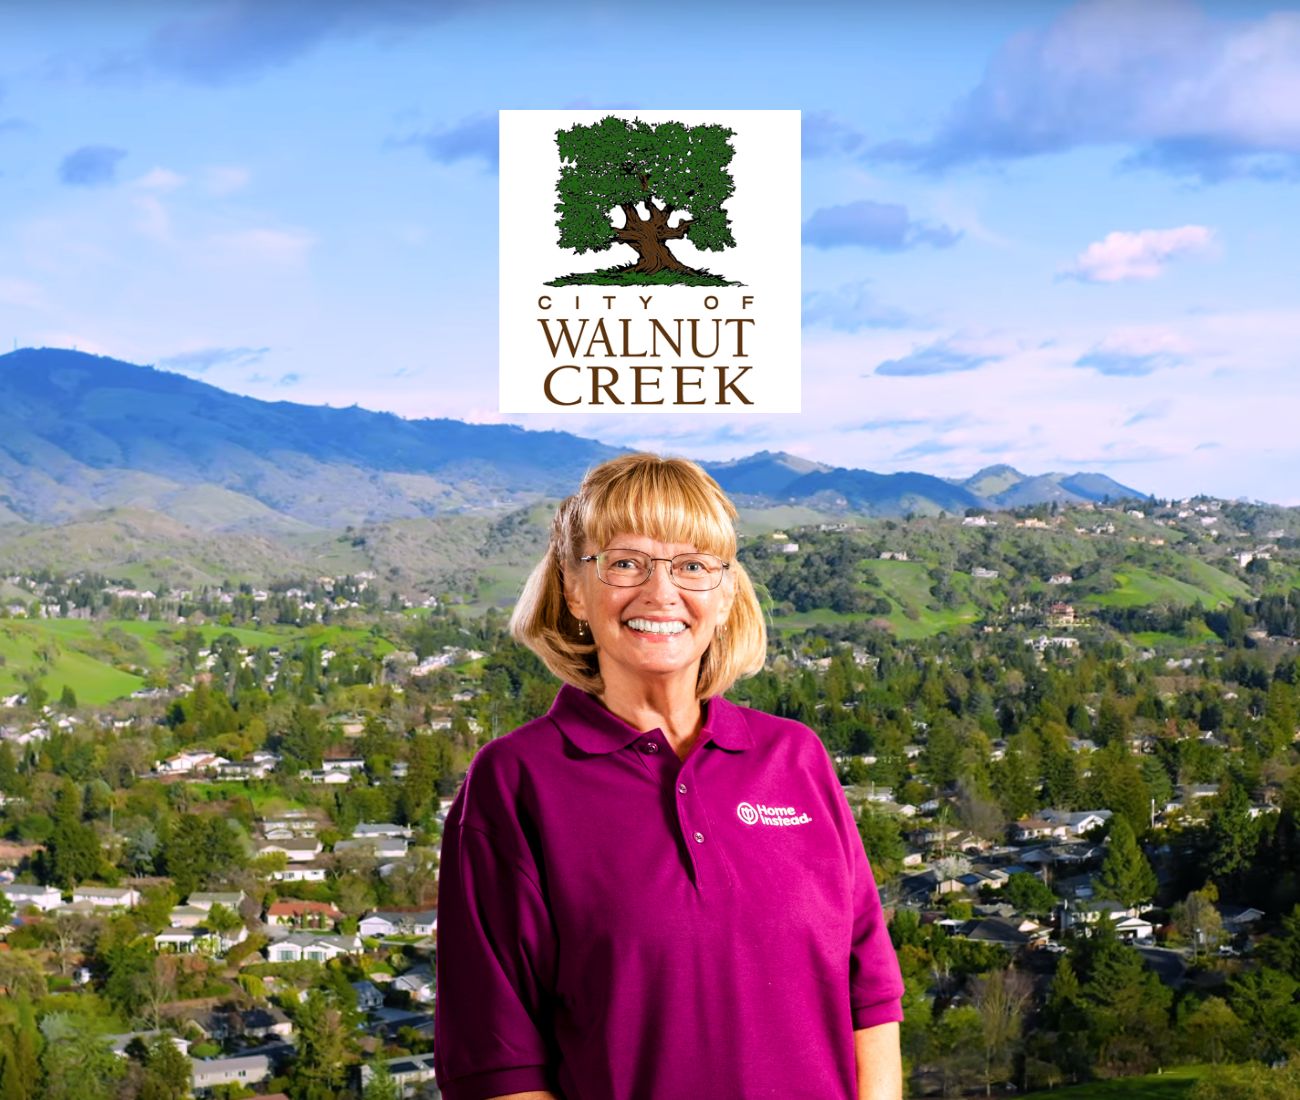 Home Instead caregiver with Walnut Creek, California in the background